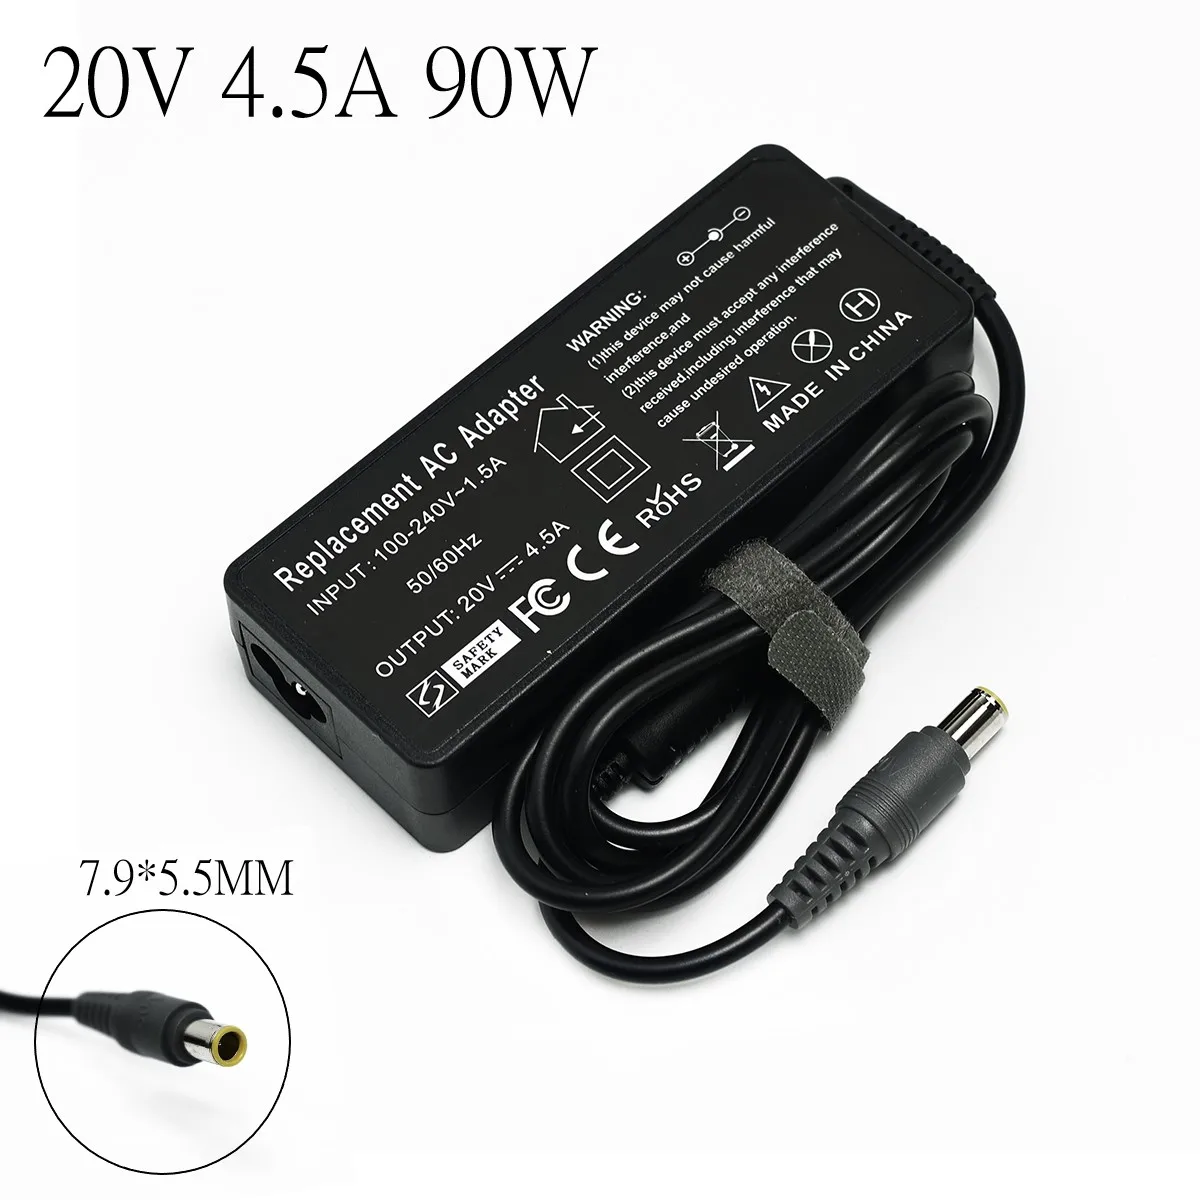 

20V 4.5A 90W Replacement AC Adapter Charger For Lenovo Thinkpad E420 E430 T61 T60p Z60T T60 T420 T430 F25 Notebook Power Supply